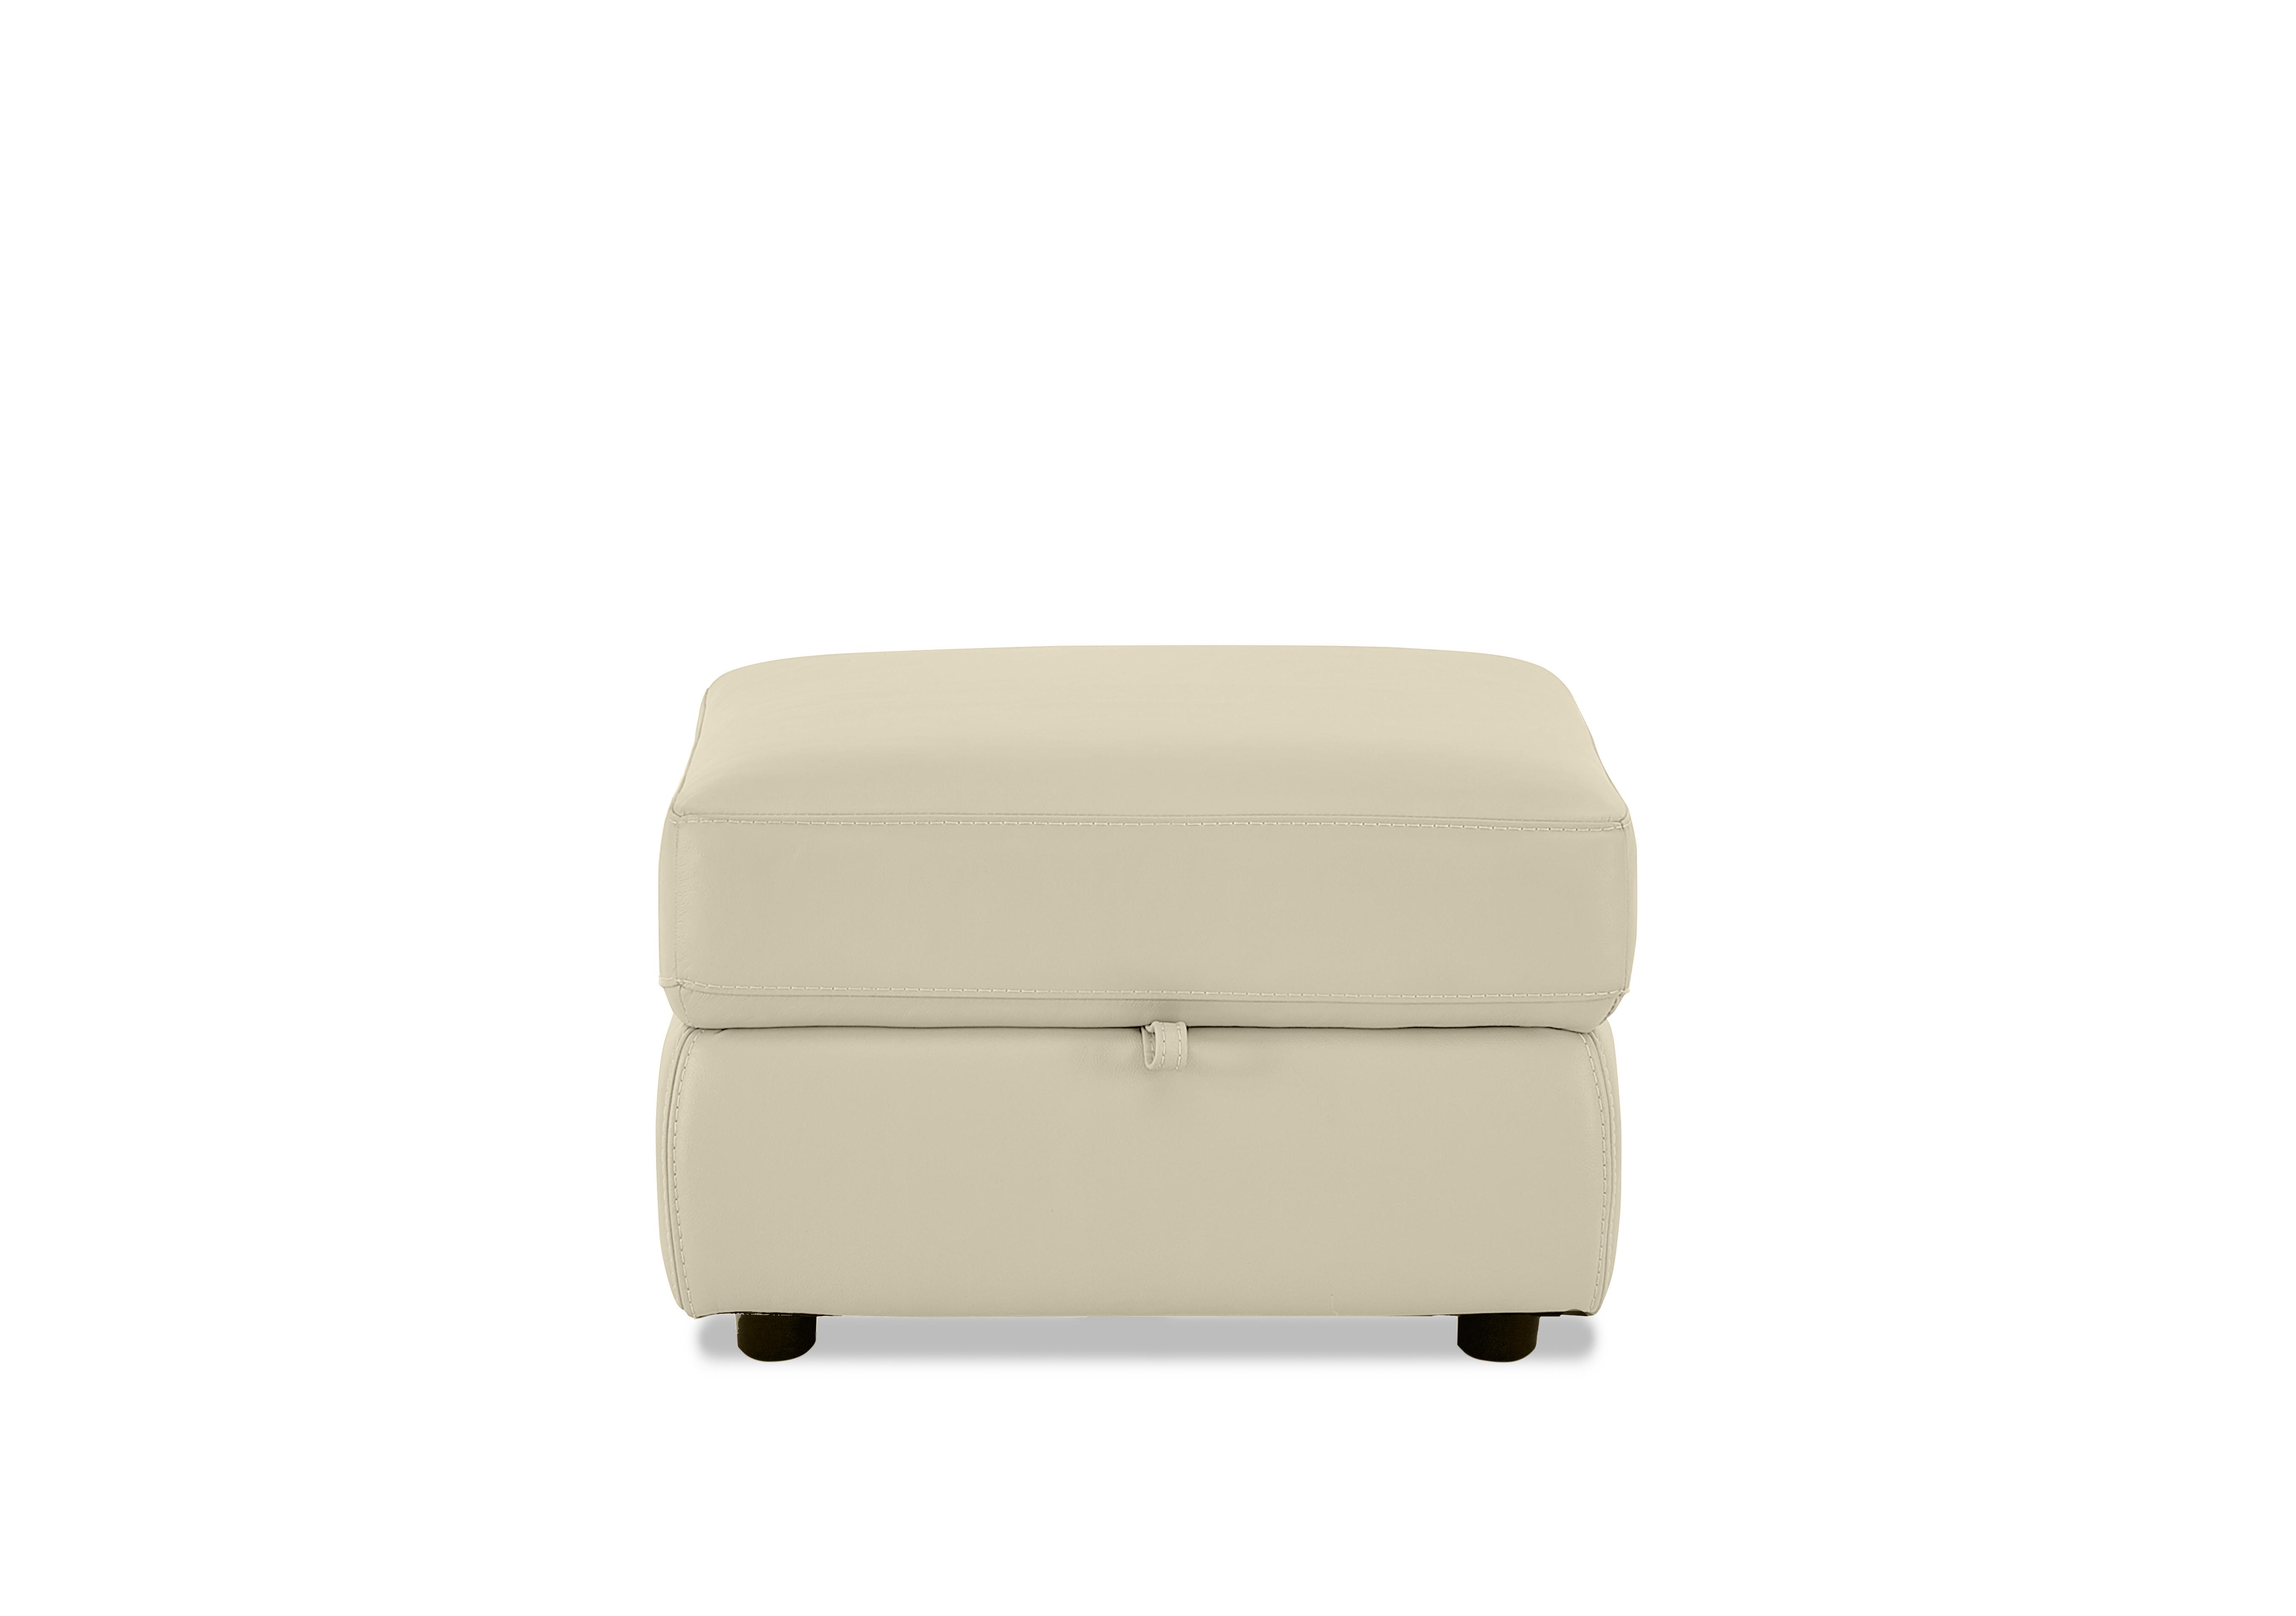 Touch Leather Storage Footstool in Bv-862c Bisque on Furniture Village